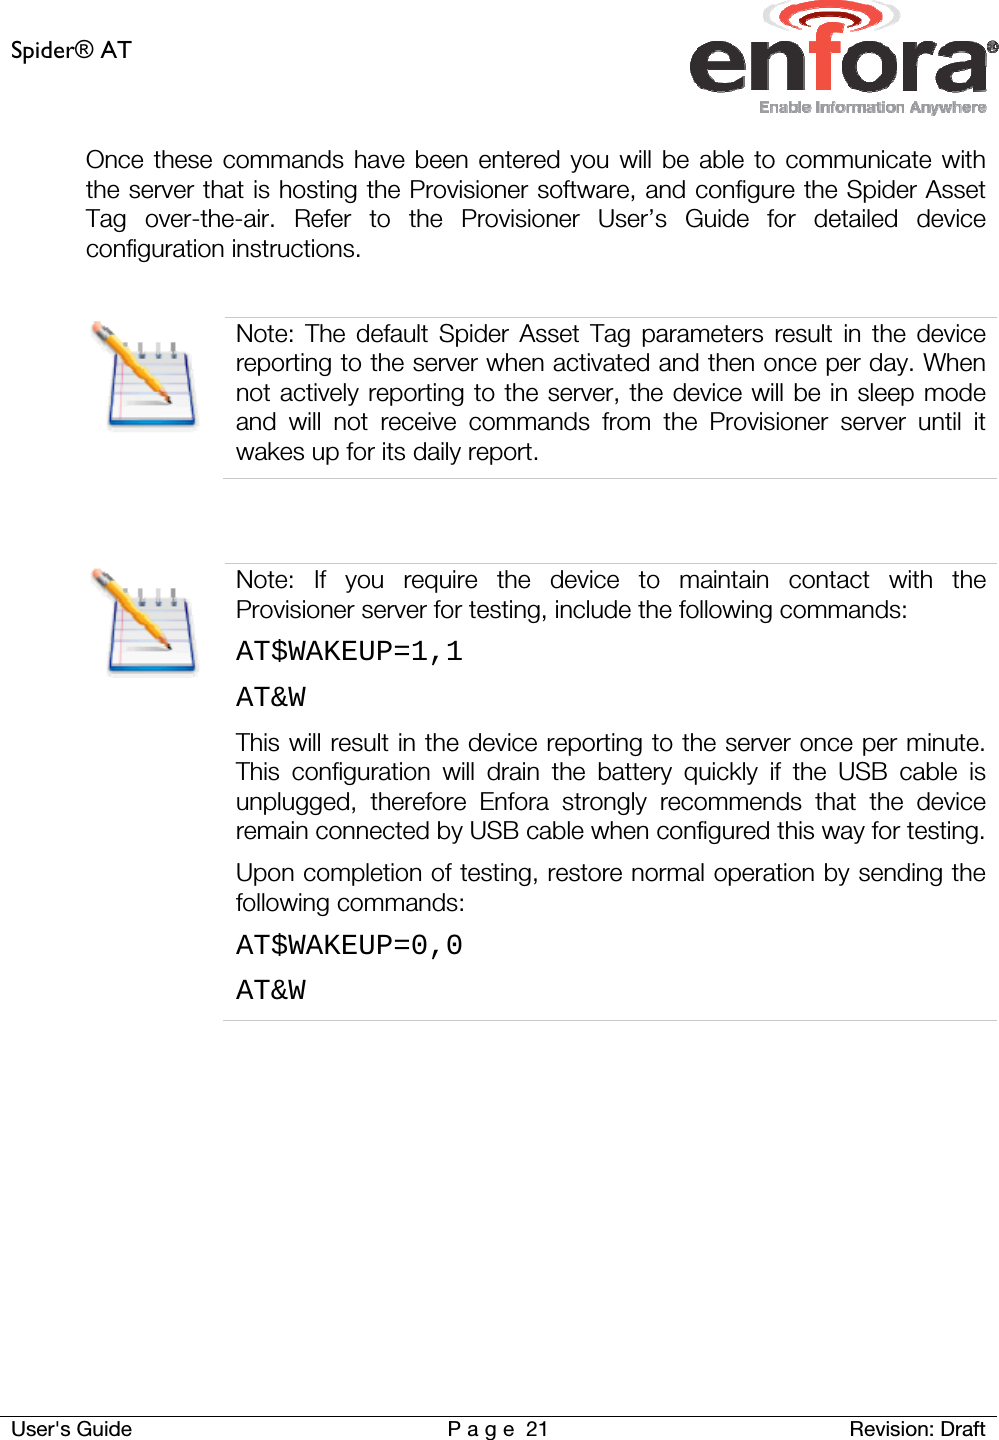 Spider® AT     User&apos;s Guide  P a g e 21 Revision: Draft Once these commands have been entered you will be able to communicate with the server that is hosting the Provisioner software, and configure the Spider Asset Tag over-the-air. Refer to the Provisioner User’s Guide for detailed device configuration instructions.   Note: The default Spider Asset Tag parameters result in the device reporting to the server when activated and then once per day. When not actively reporting to the server, the device will be in sleep mode and will not receive commands from the Provisioner server until it wakes up for its daily report.    Note: If you require the device to maintain contact with the Provisioner server for testing, include the following commands: AT$WAKEUP=1,1 AT&amp;W This will result in the device reporting to the server once per minute. This configuration will drain the battery quickly if the USB cable is unplugged, therefore Enfora strongly recommends that the device remain connected by USB cable when configured this way for testing.Upon completion of testing, restore normal operation by sending the following commands: AT$WAKEUP=0,0 AT&amp;W     